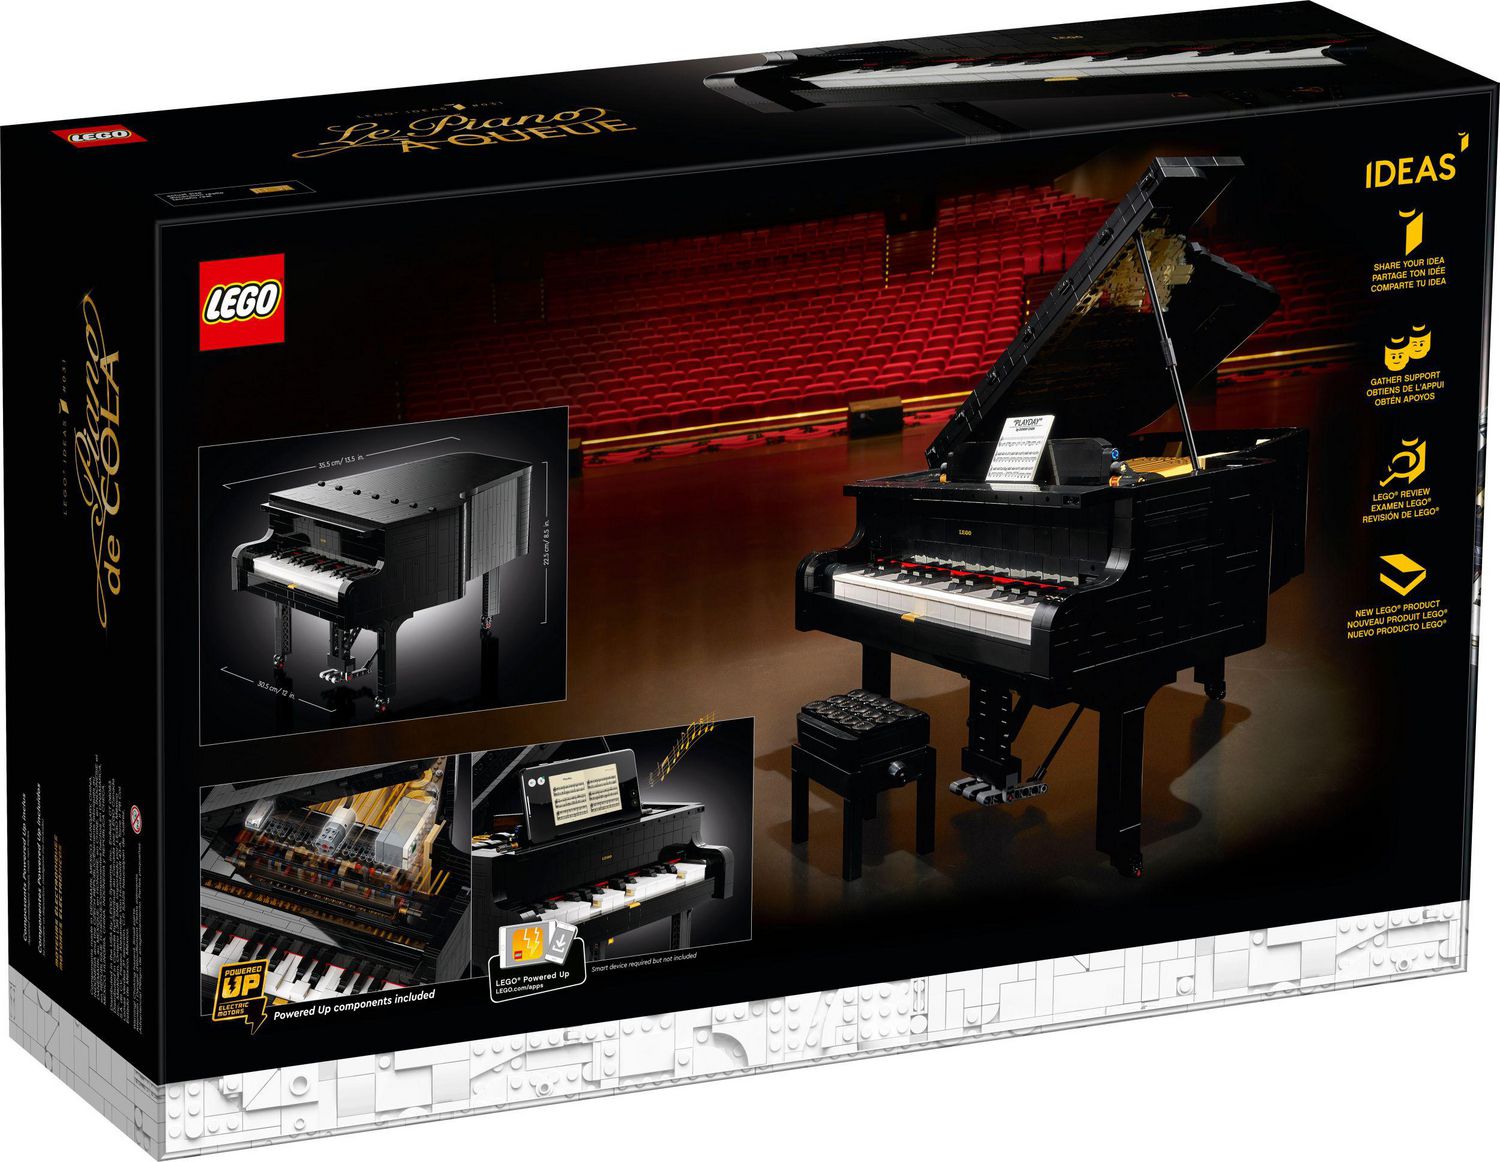 LEGO Ideas Grand Piano 21323 Build-Your-Own Toy Piano Building Kit